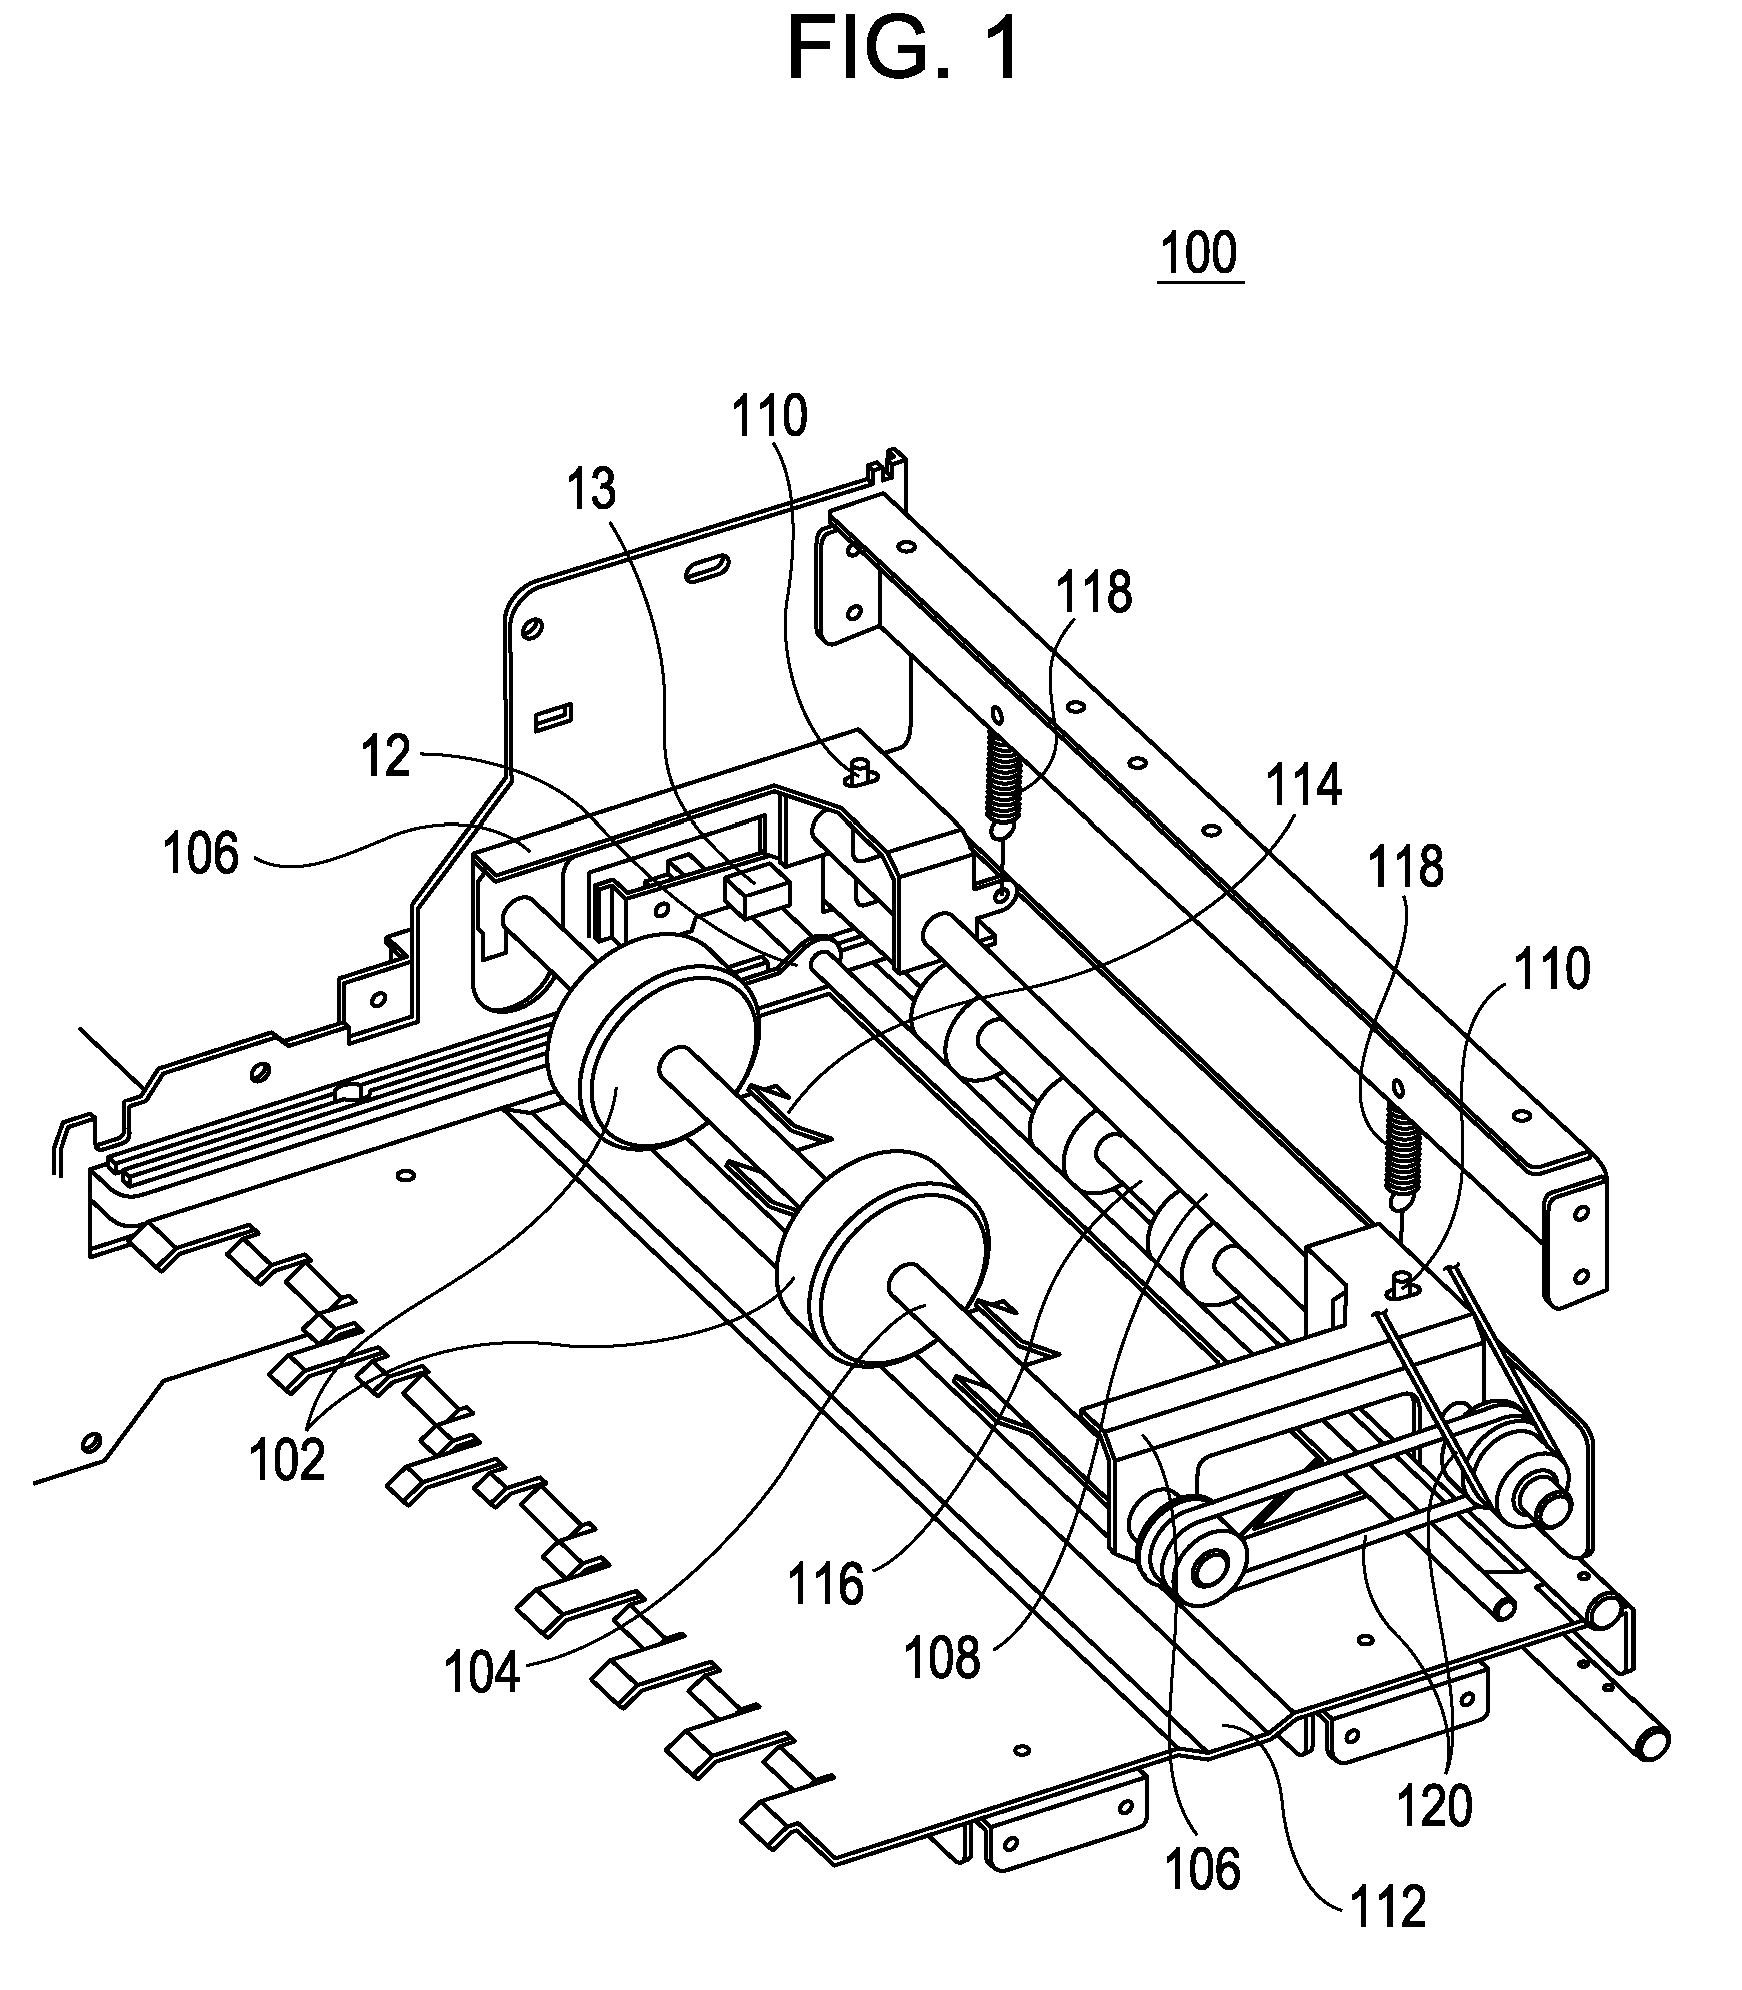 Apparatus, method, and control program for turning the pages of a passbook